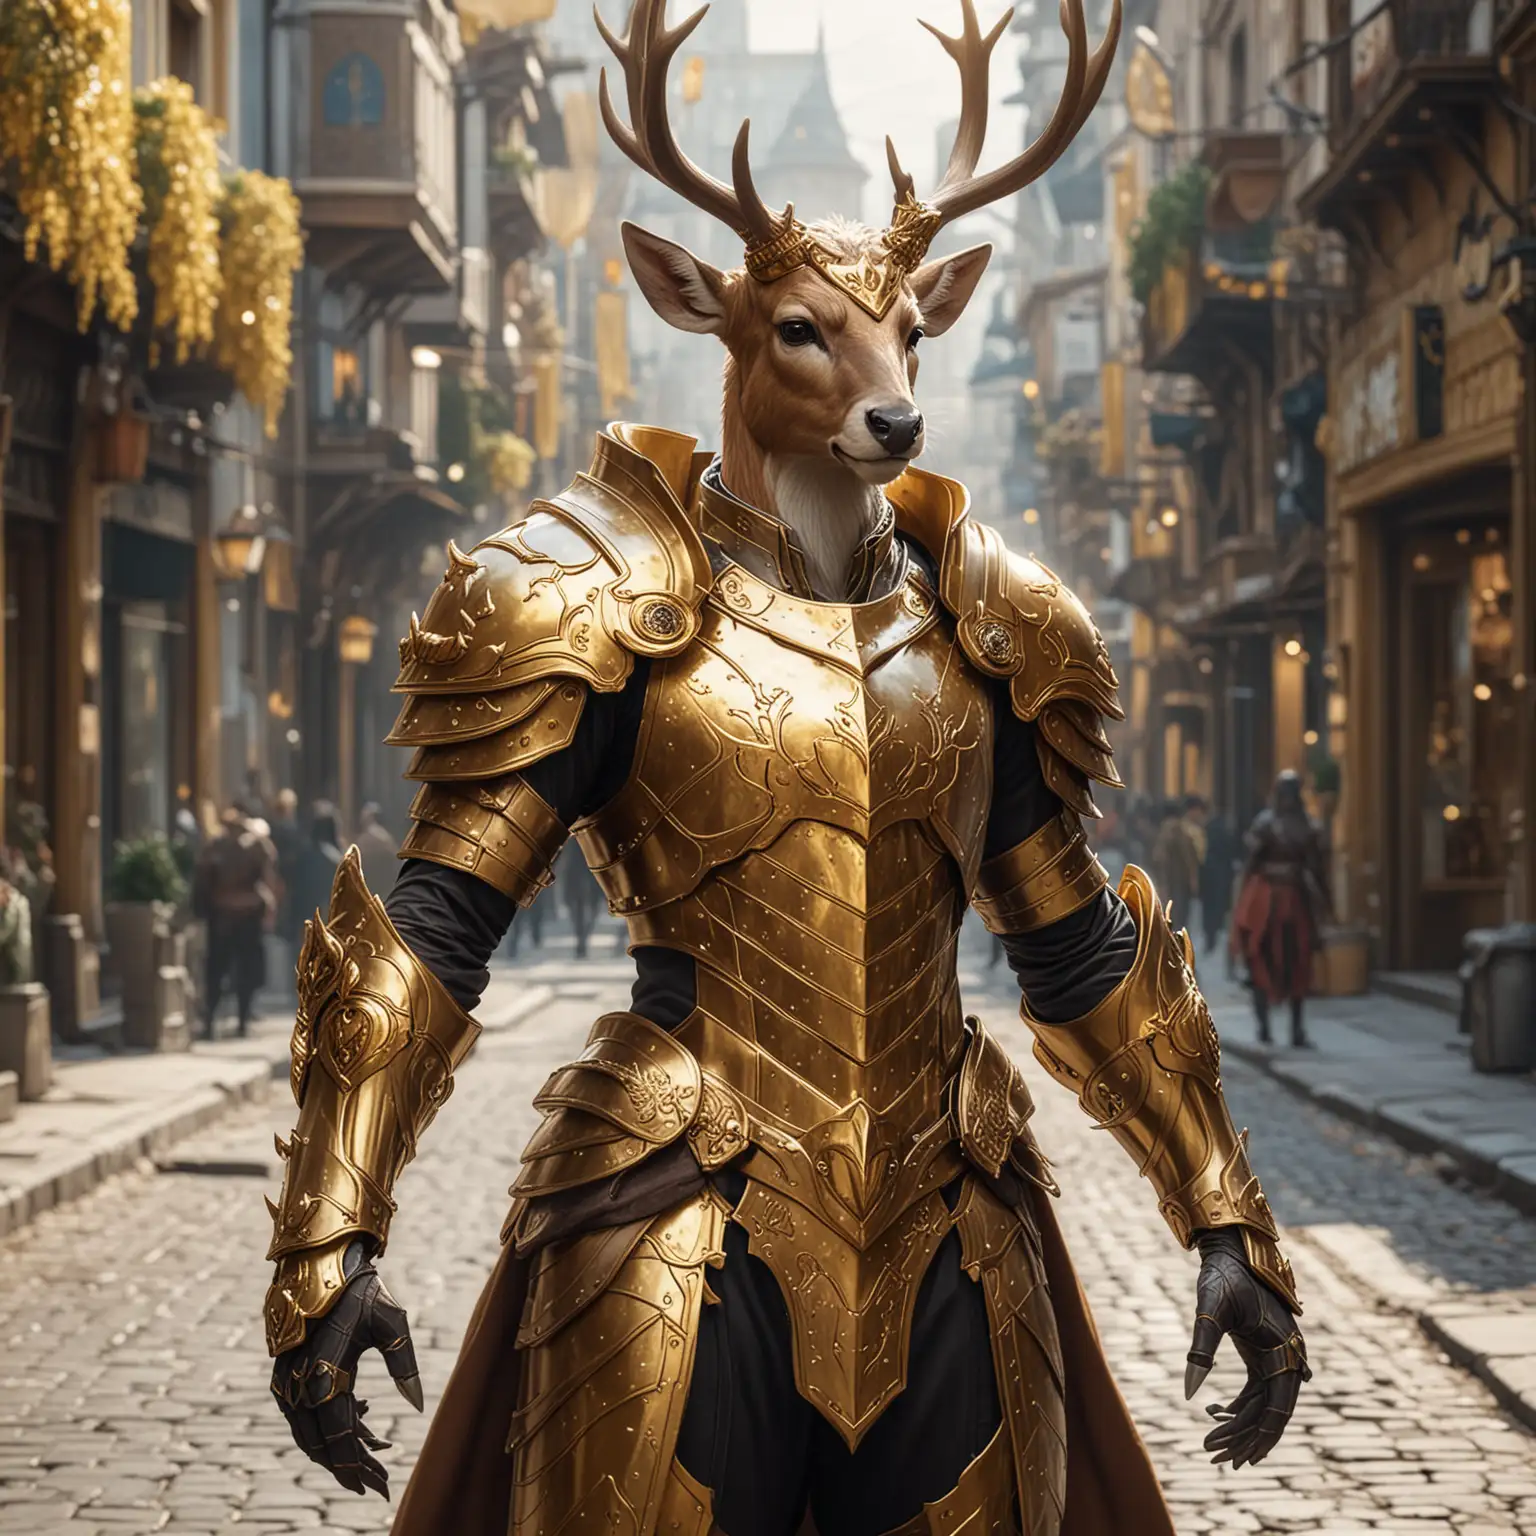 humanoid deer paladin in the a fantasy city during the day, golden plate armor, shield